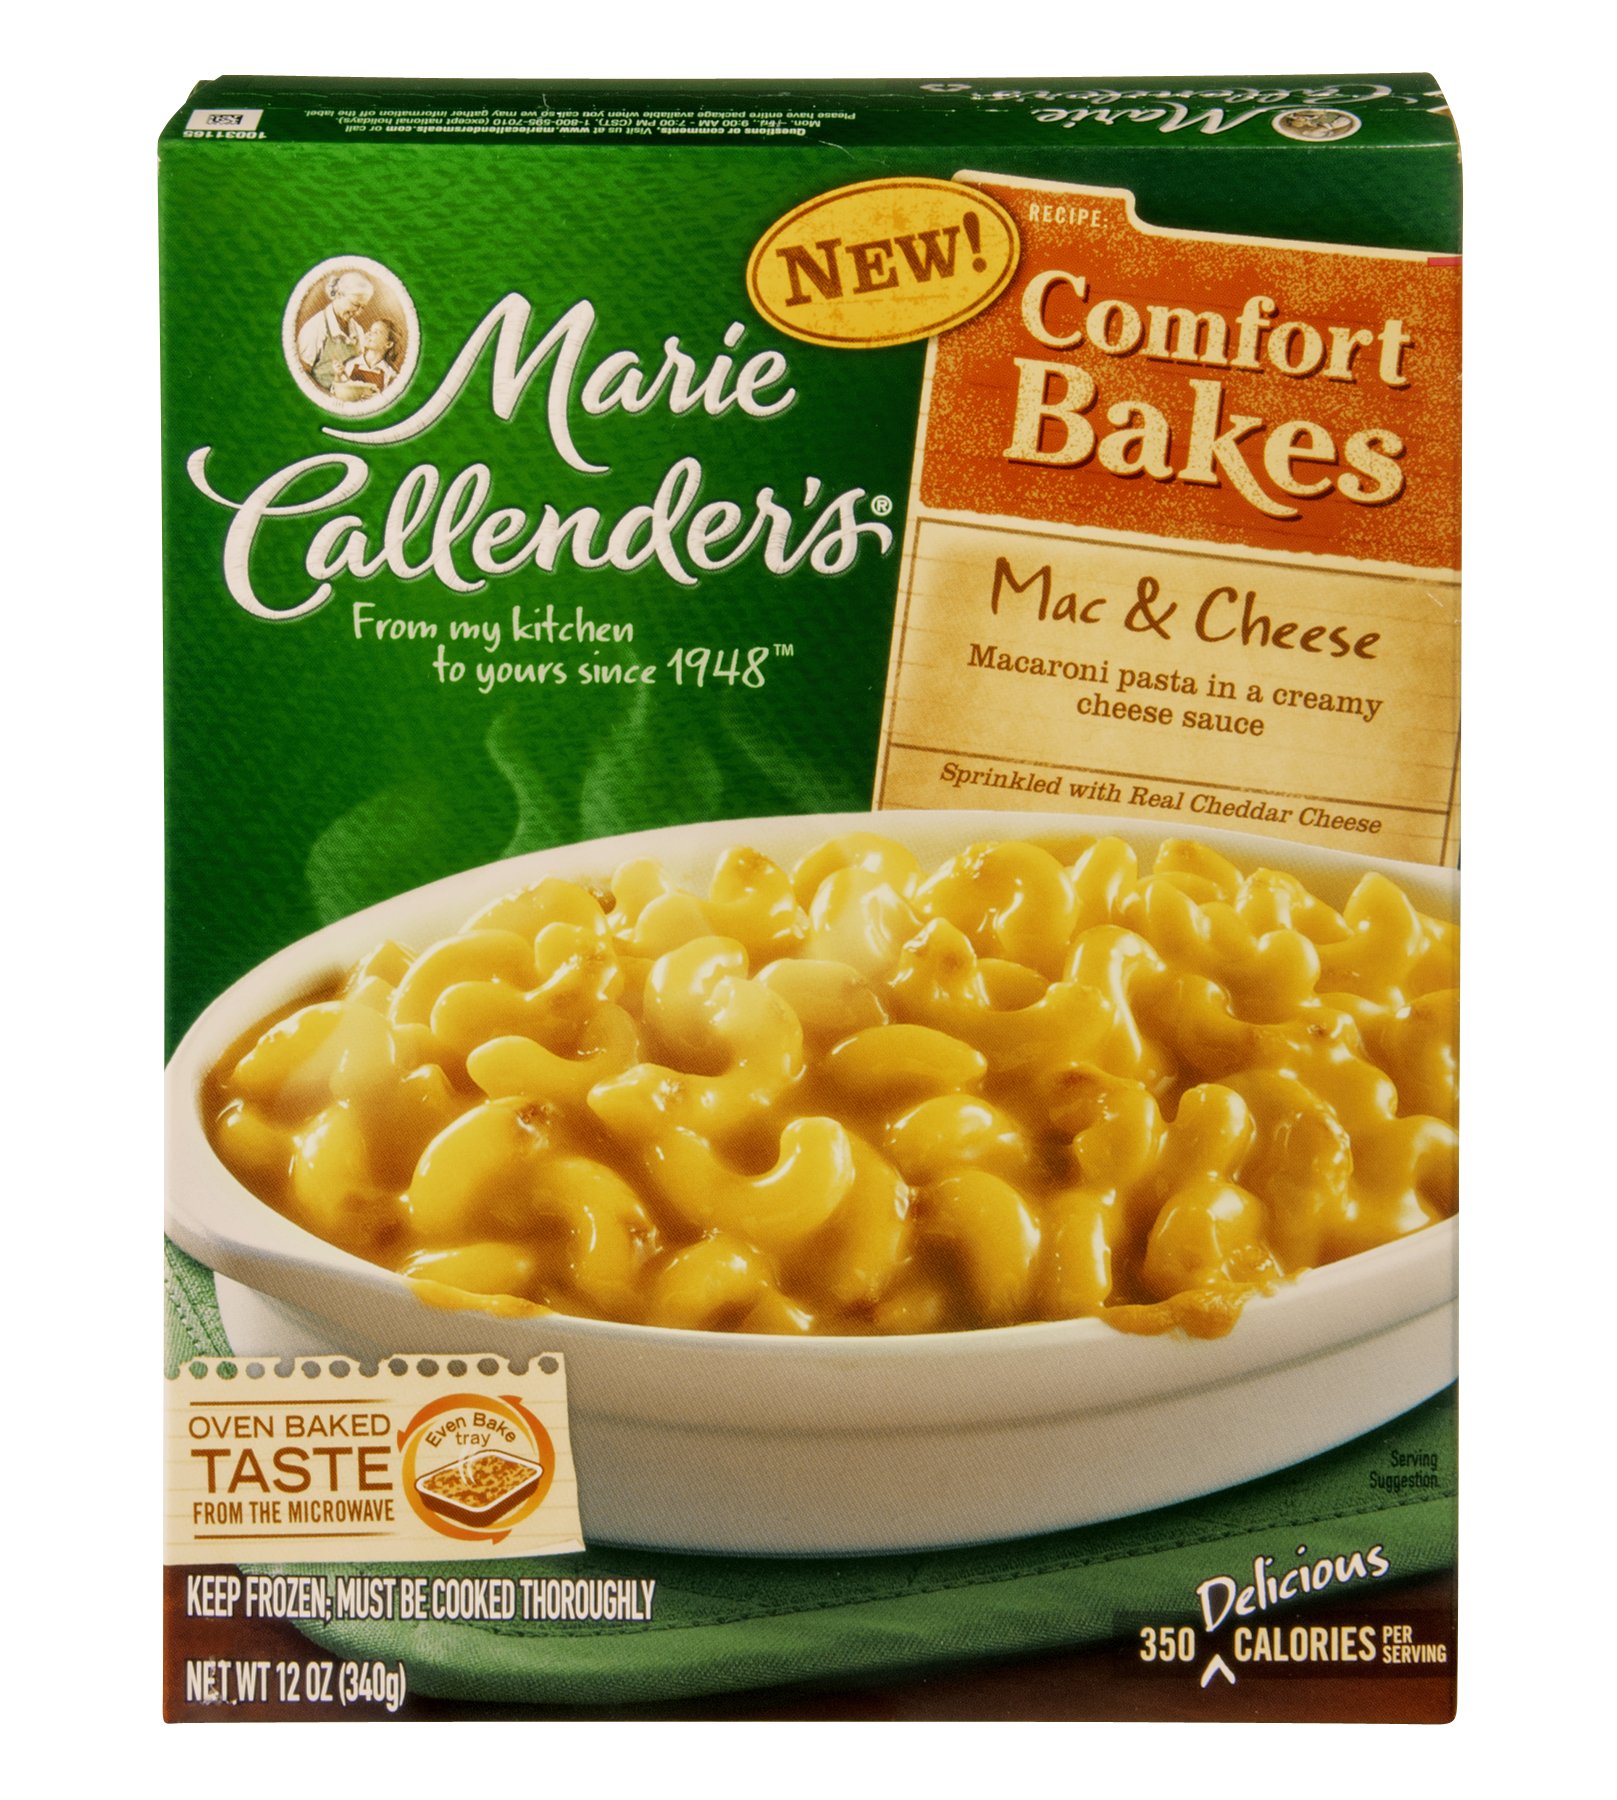 Marie Callender's Comfort Bakes Mac and Cheese Shop